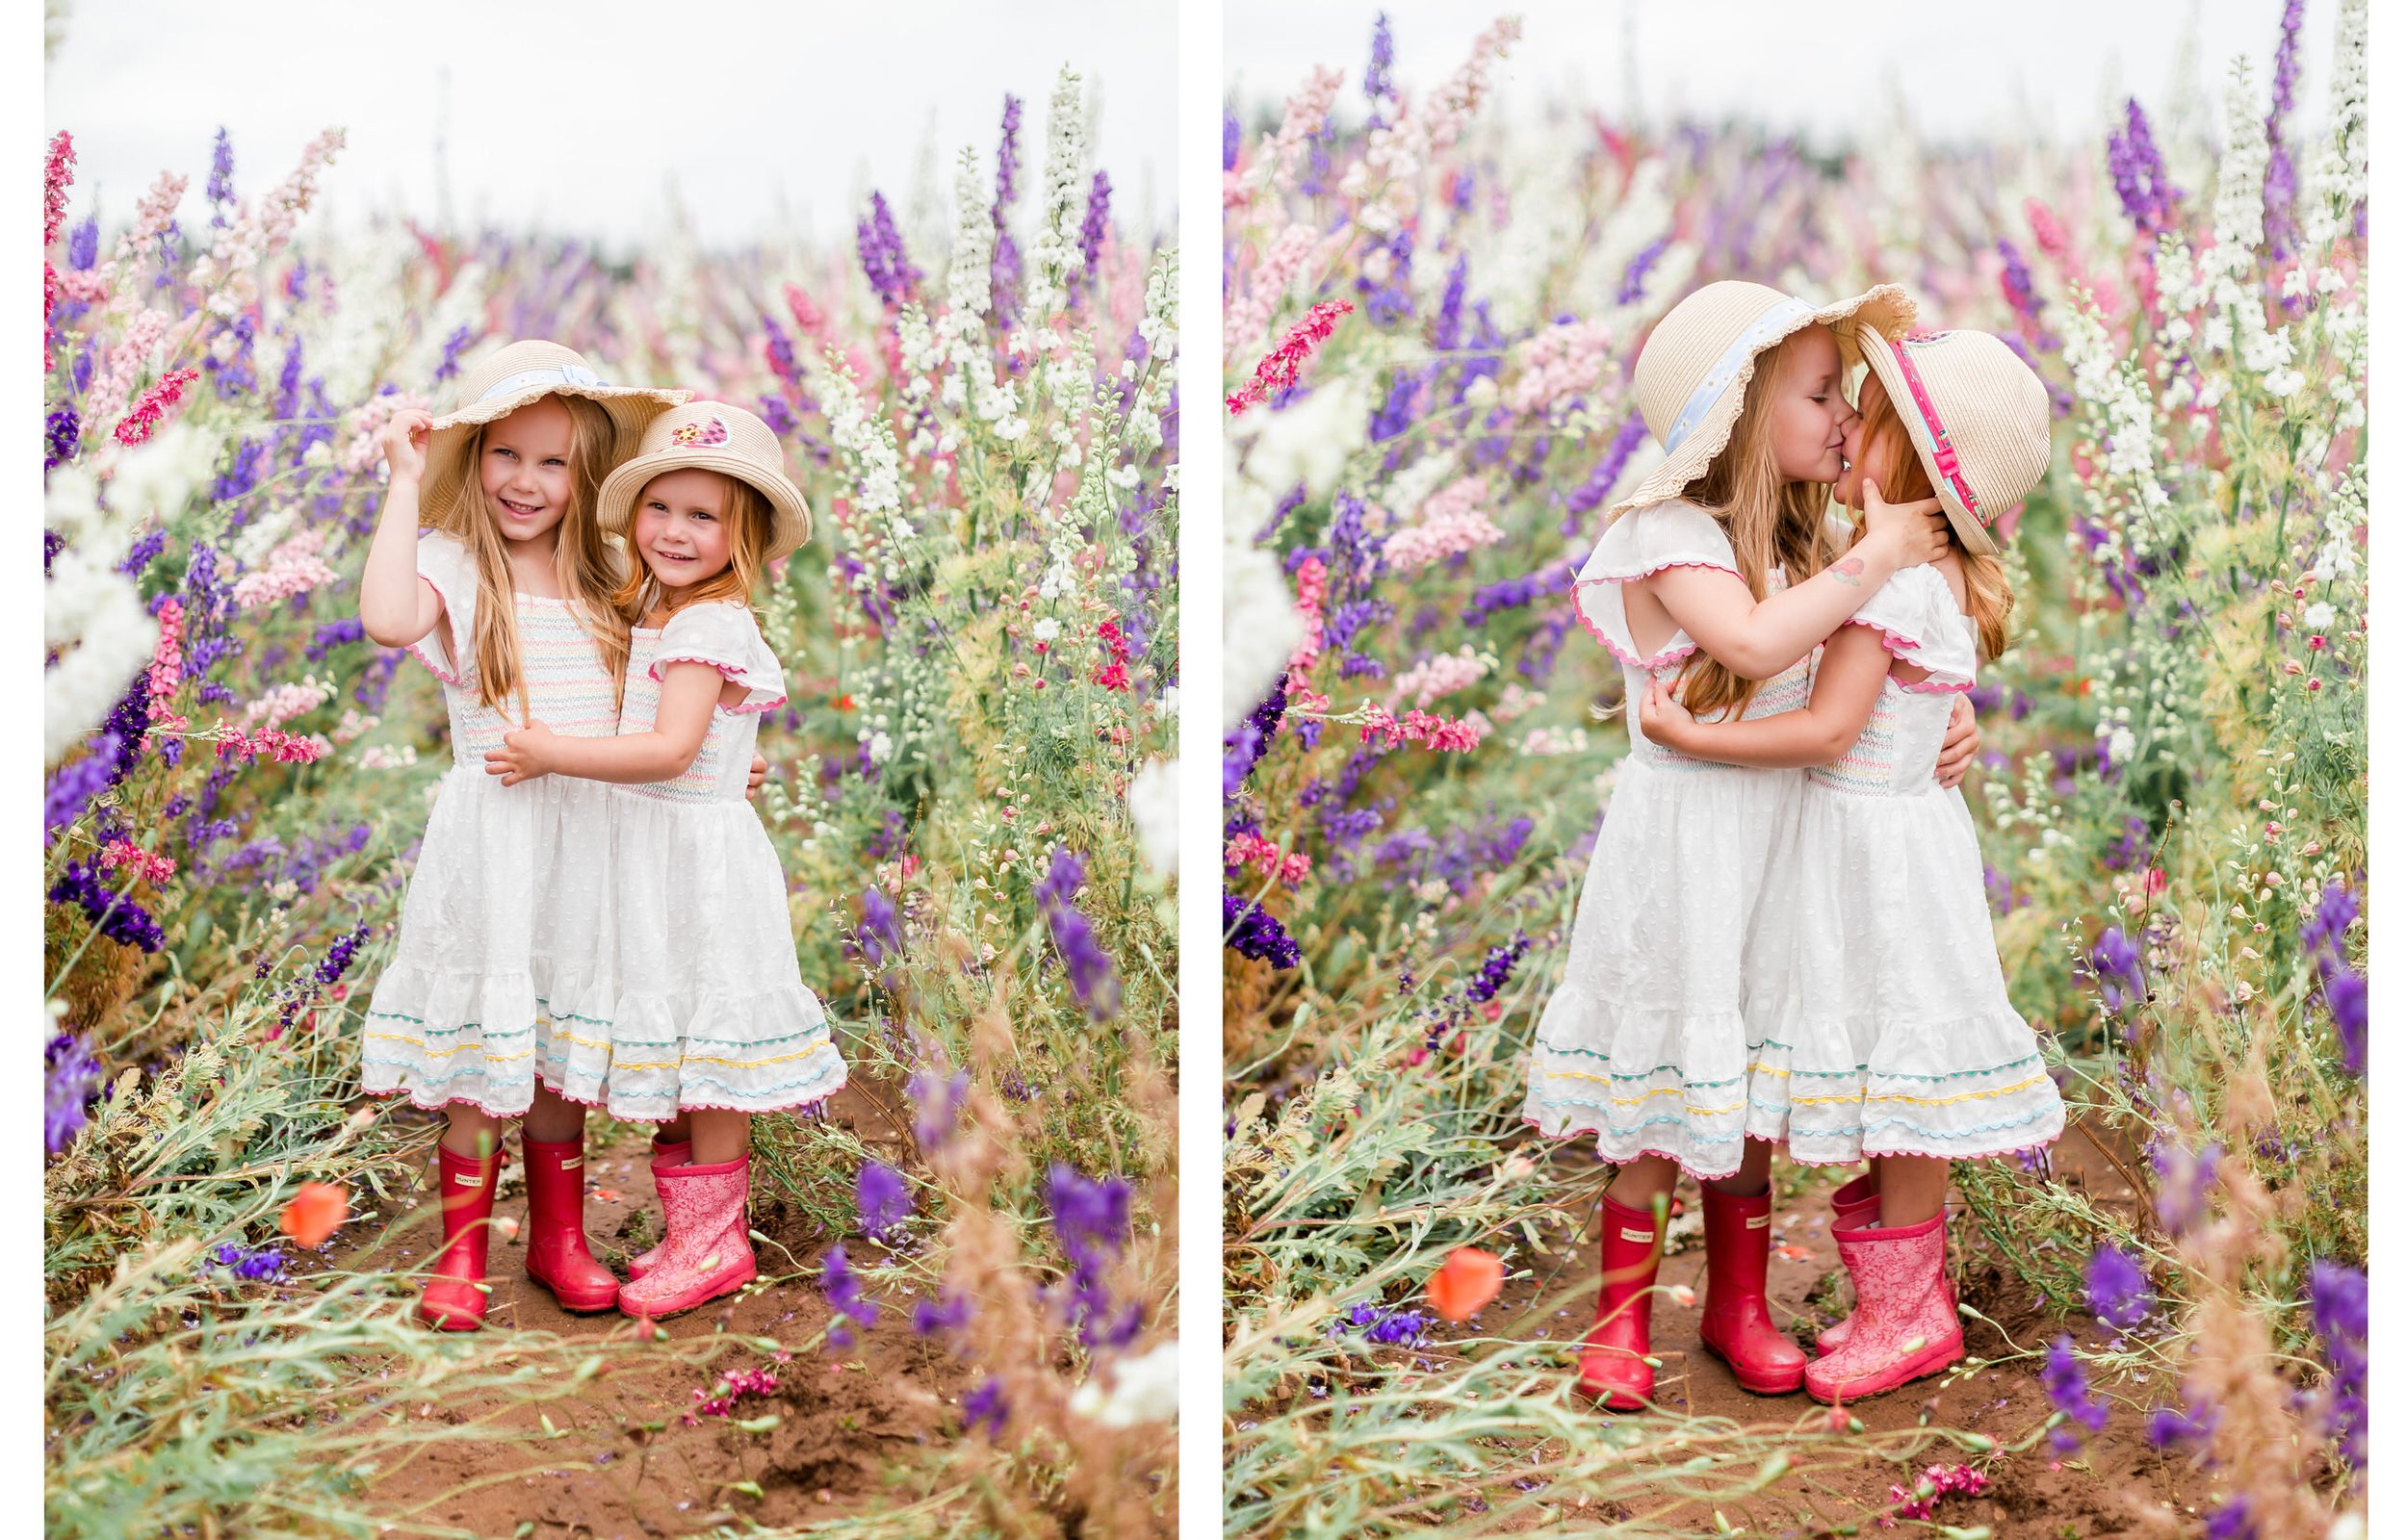 Iris_and_Ivy_family_photography_confetti_fields.jpg